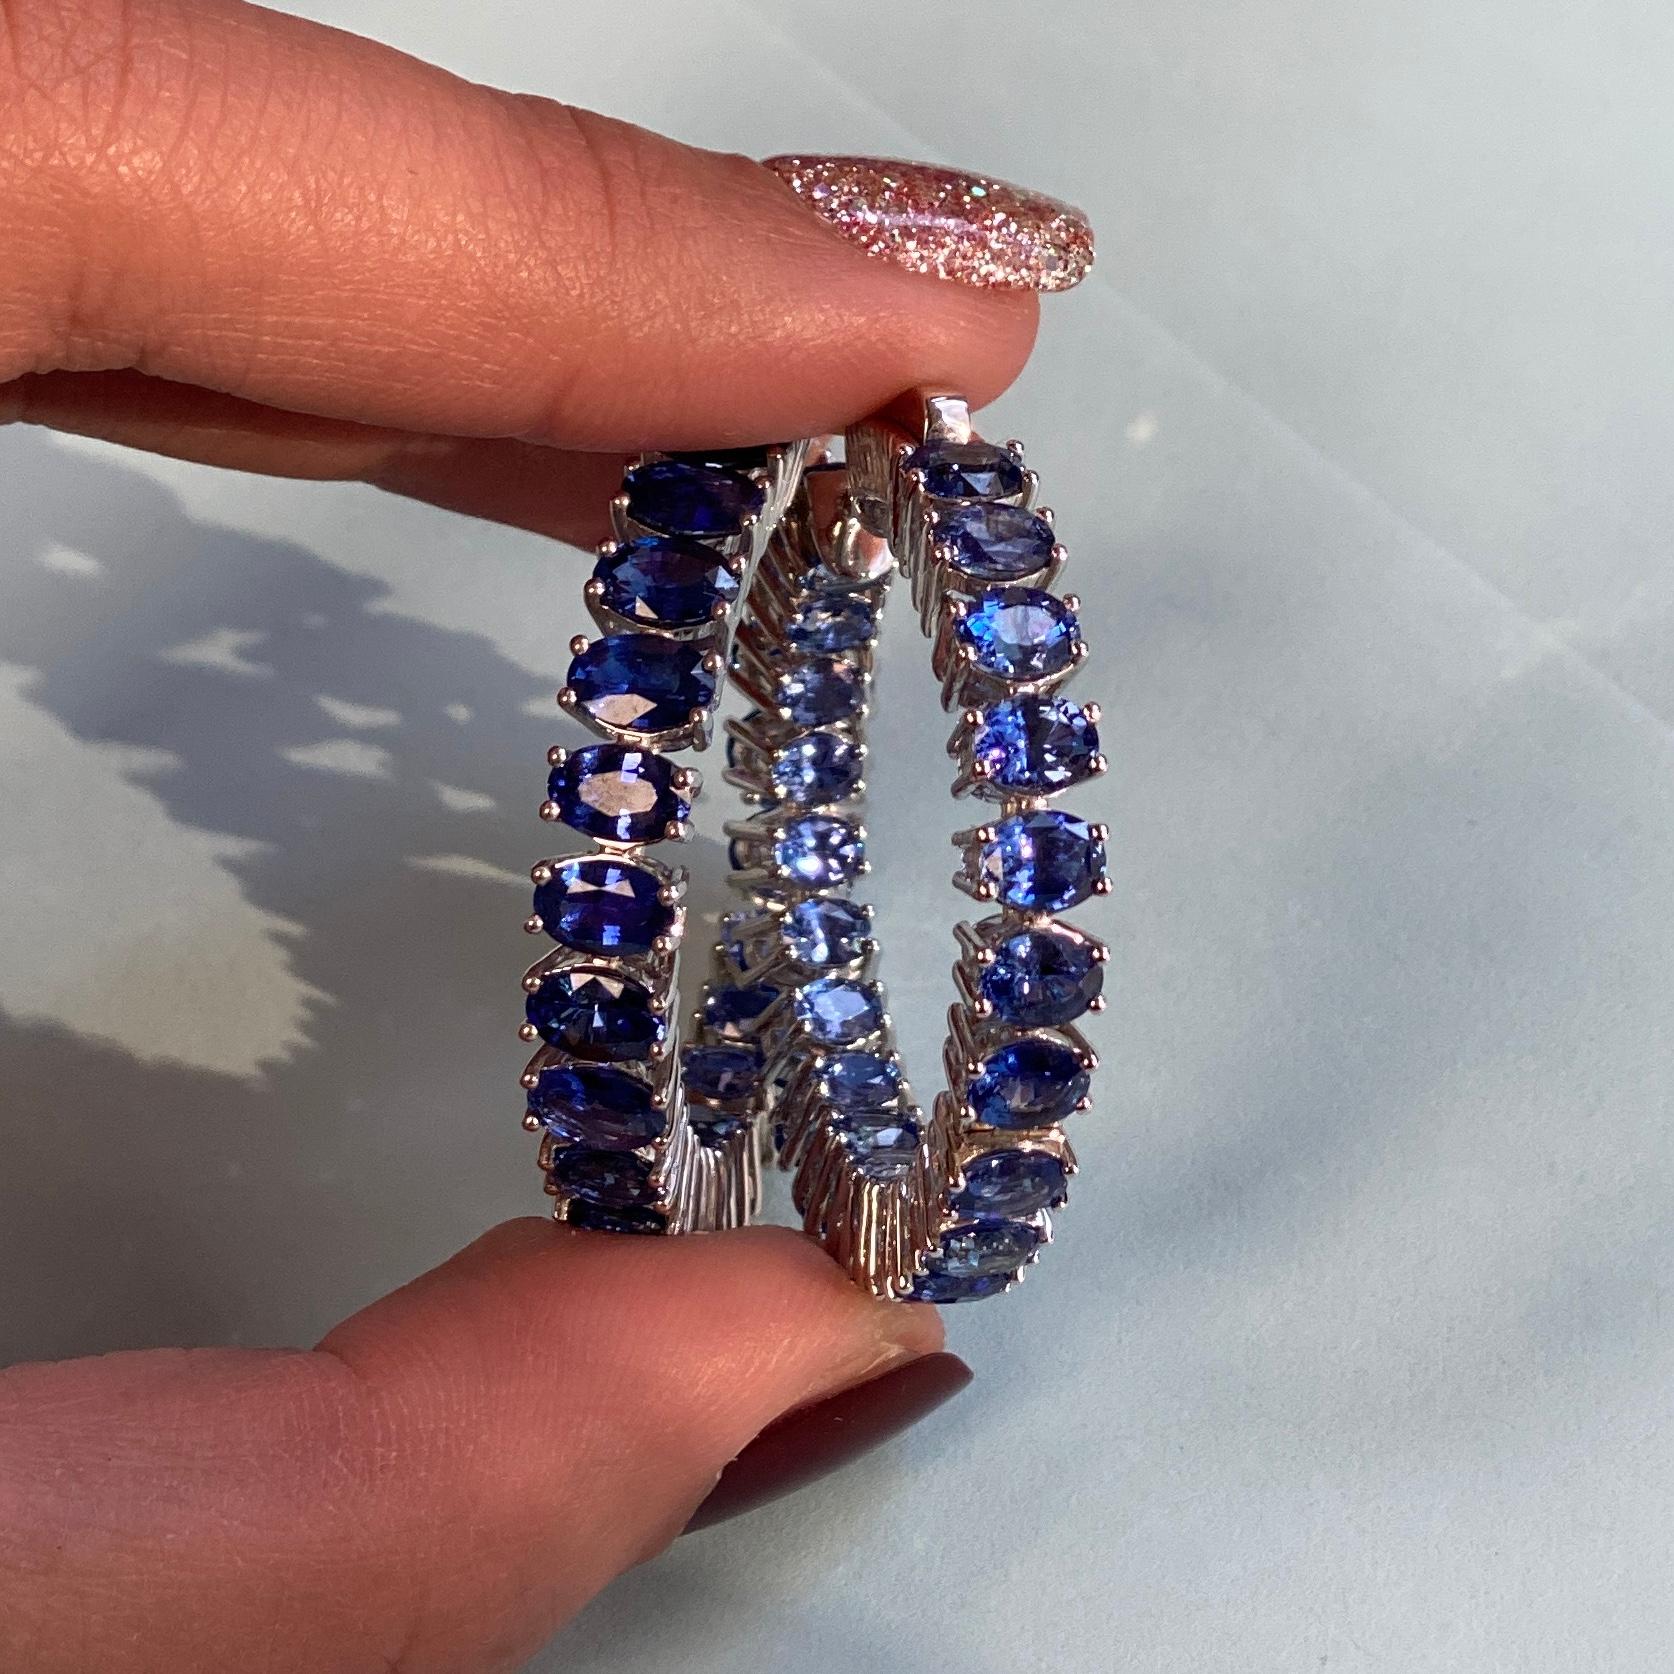  Faceted Oval Blue Sapphire Hoops in 18k White Gold and Rhodium, from 'G-One' Collection

Gemstone Weight: 27.33 Carats

